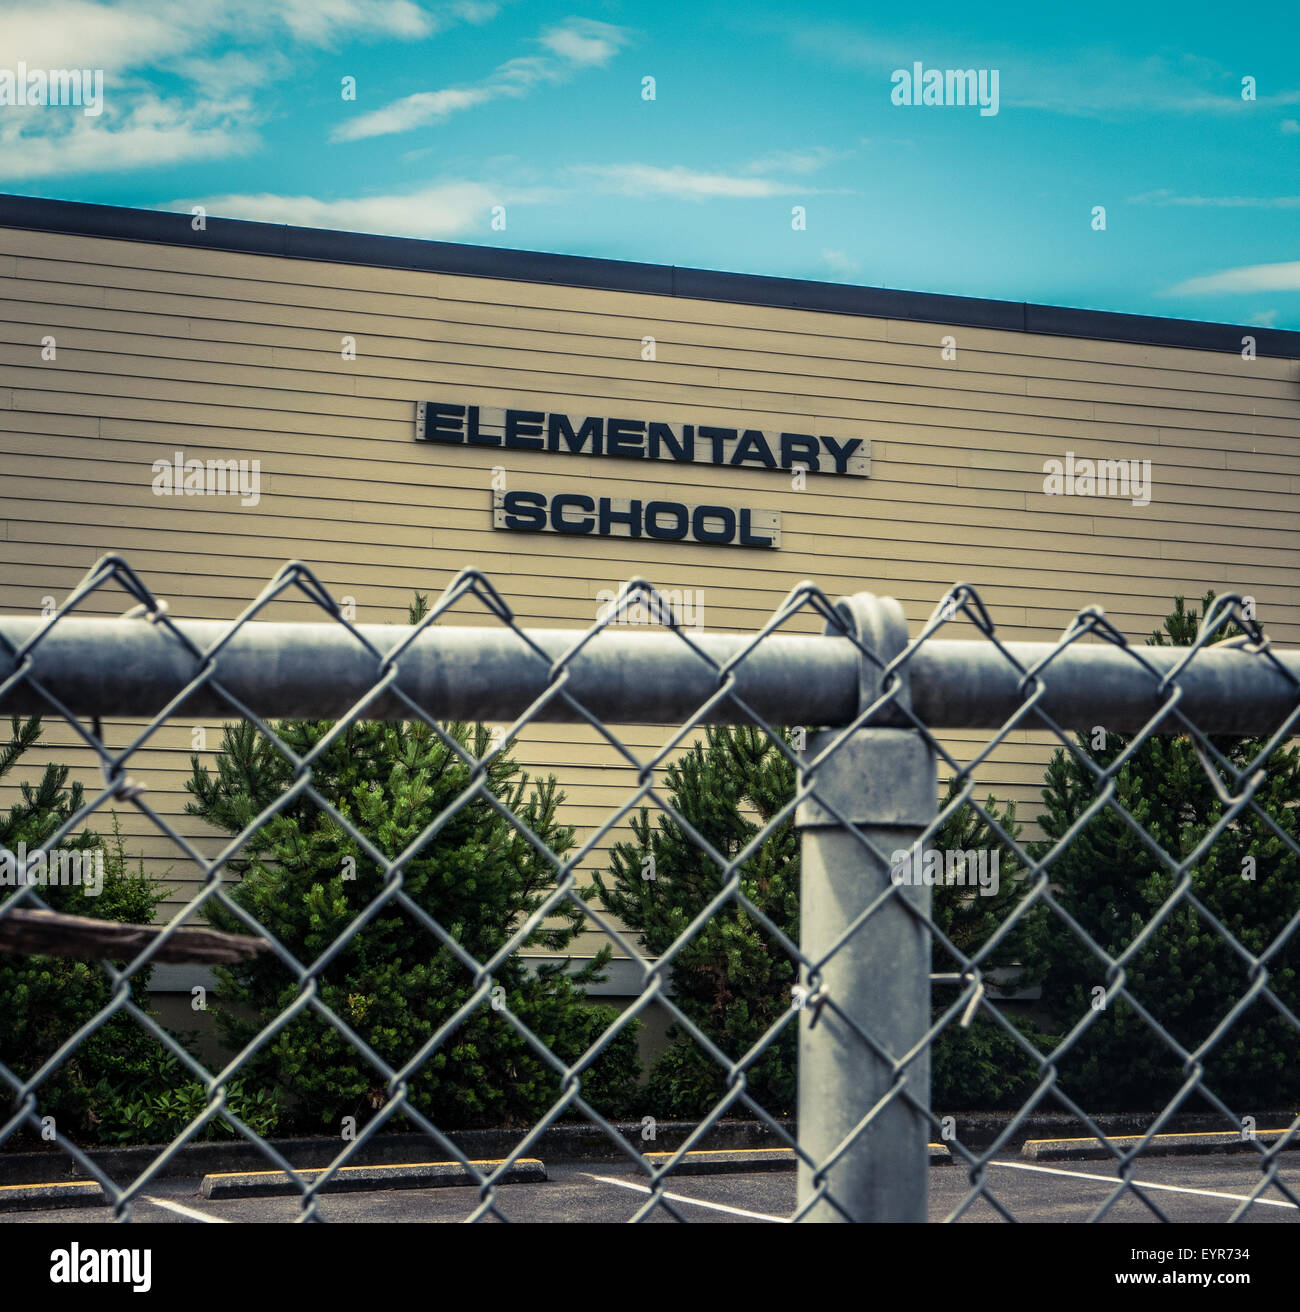 Typical USA Elementary School With Chain Link Fence In Foreground Stock Photo